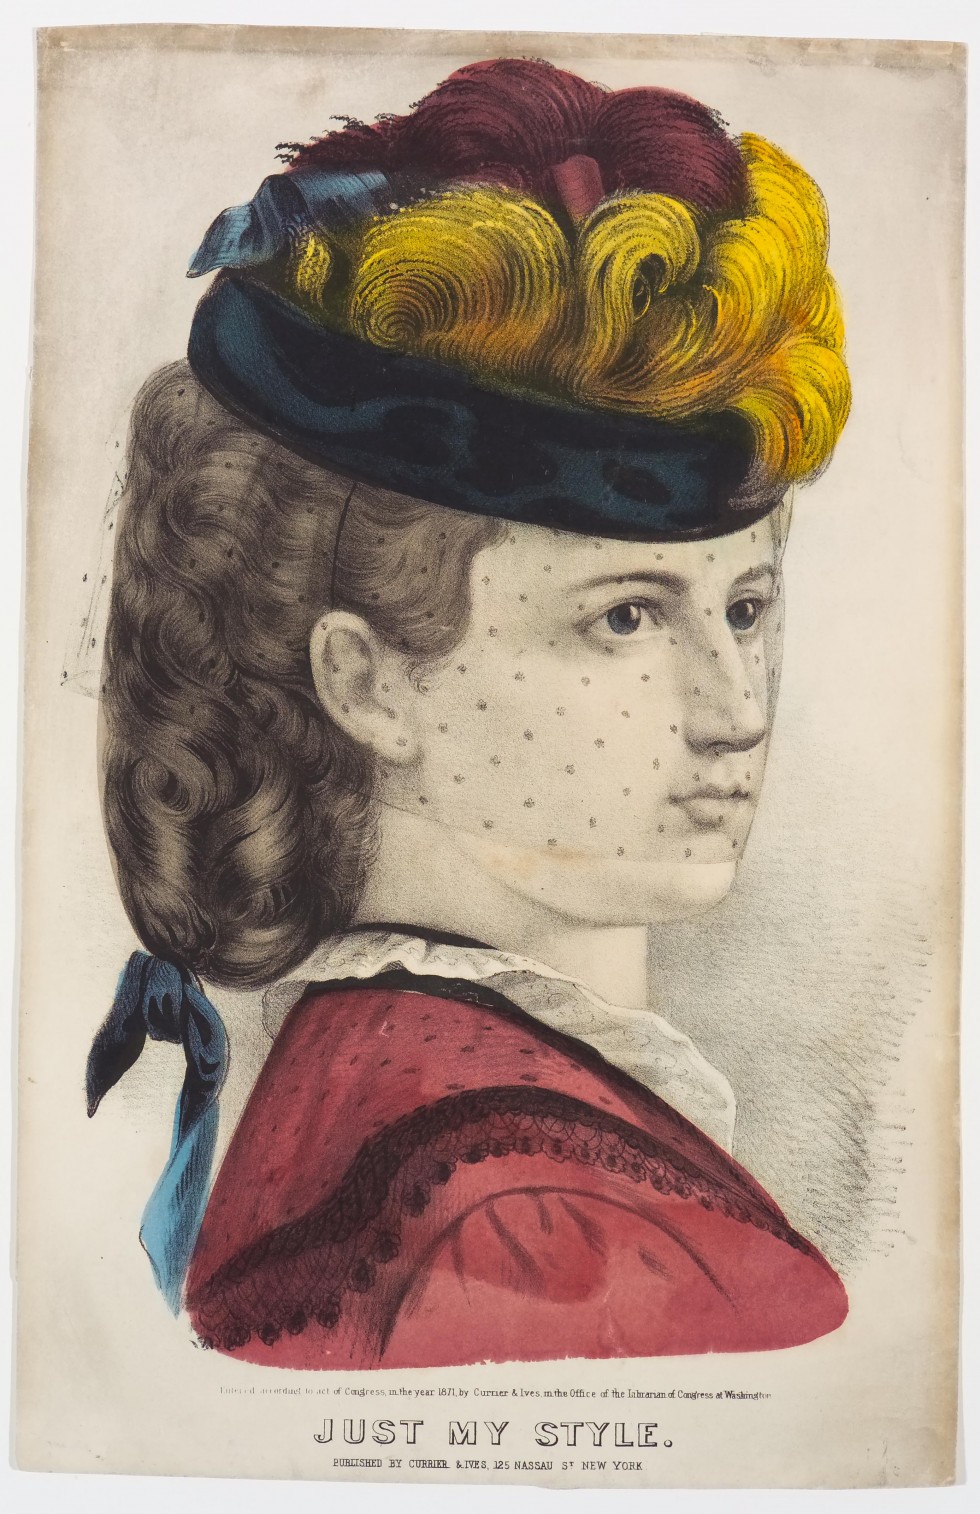 Upper torso view of woman facing right wearing blue hat with yellow and red plumes nestled in top of hat